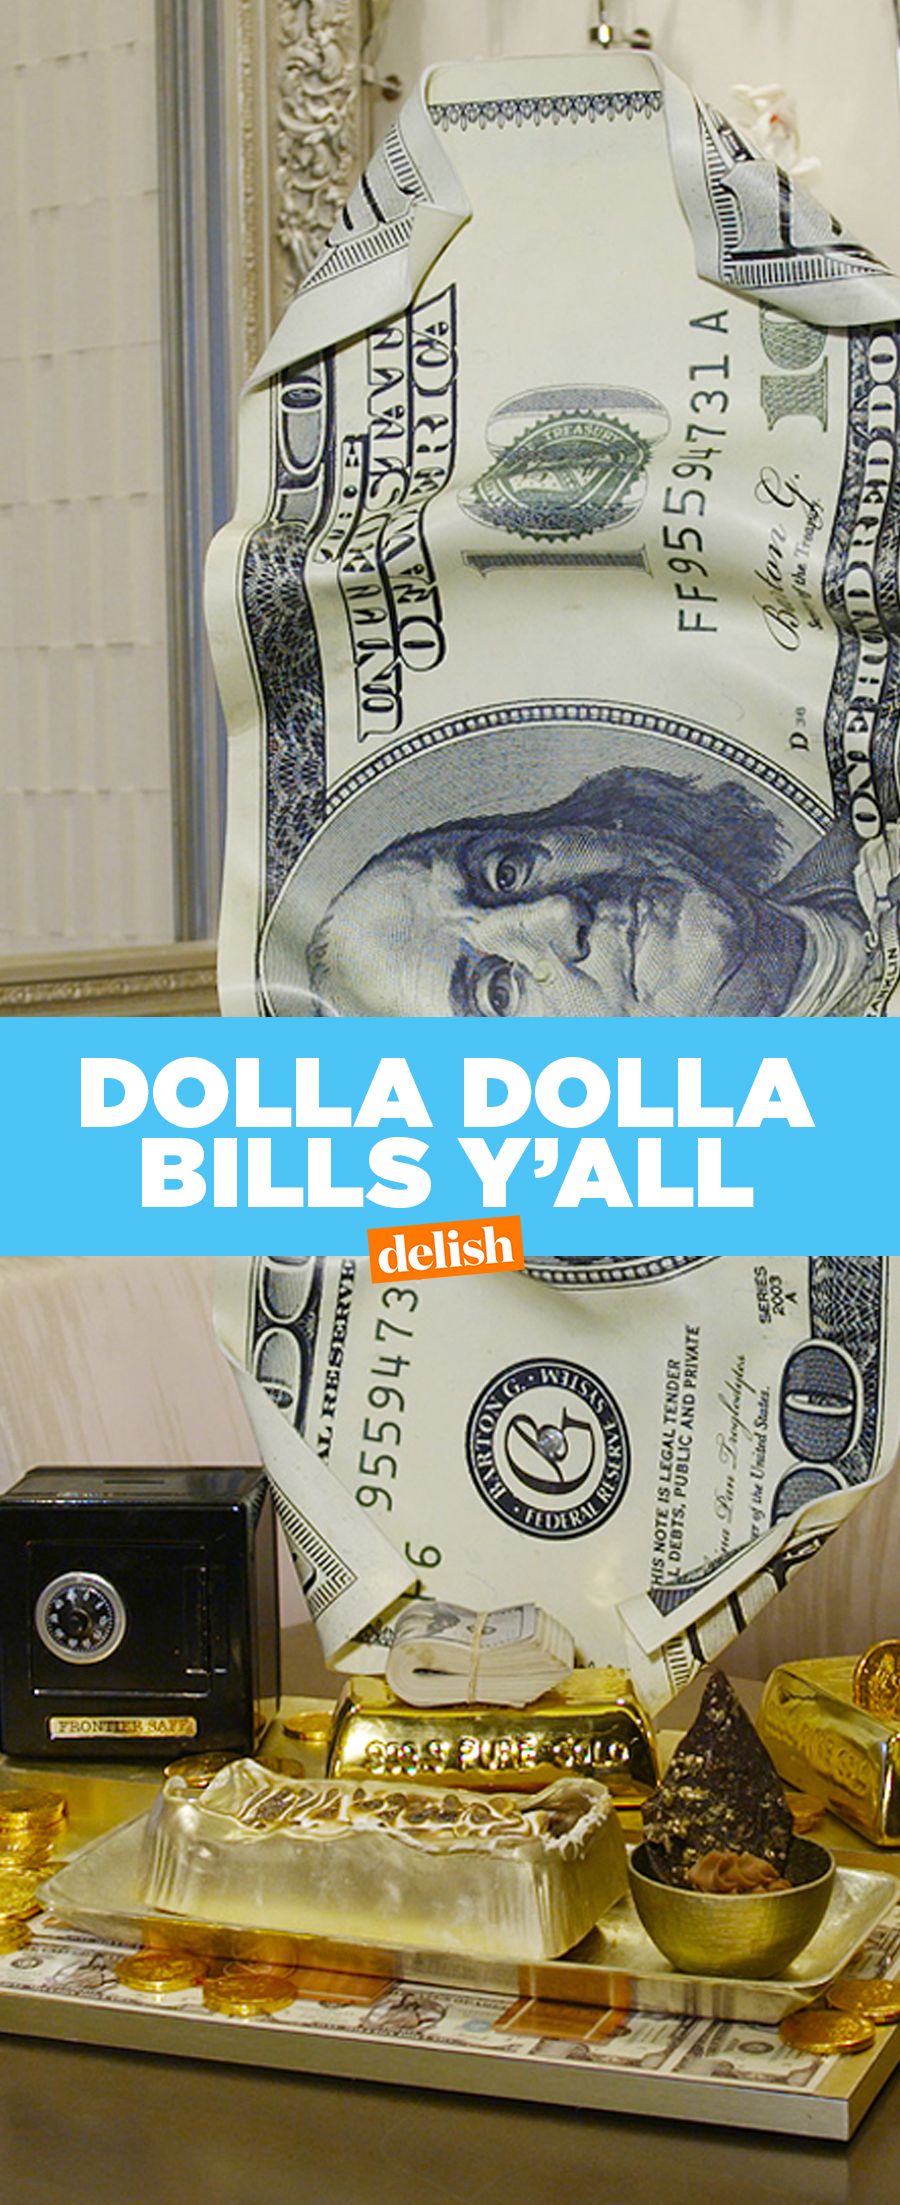 You've Got To See This Flaming Dolla Dolla Bills Y'all Dessert